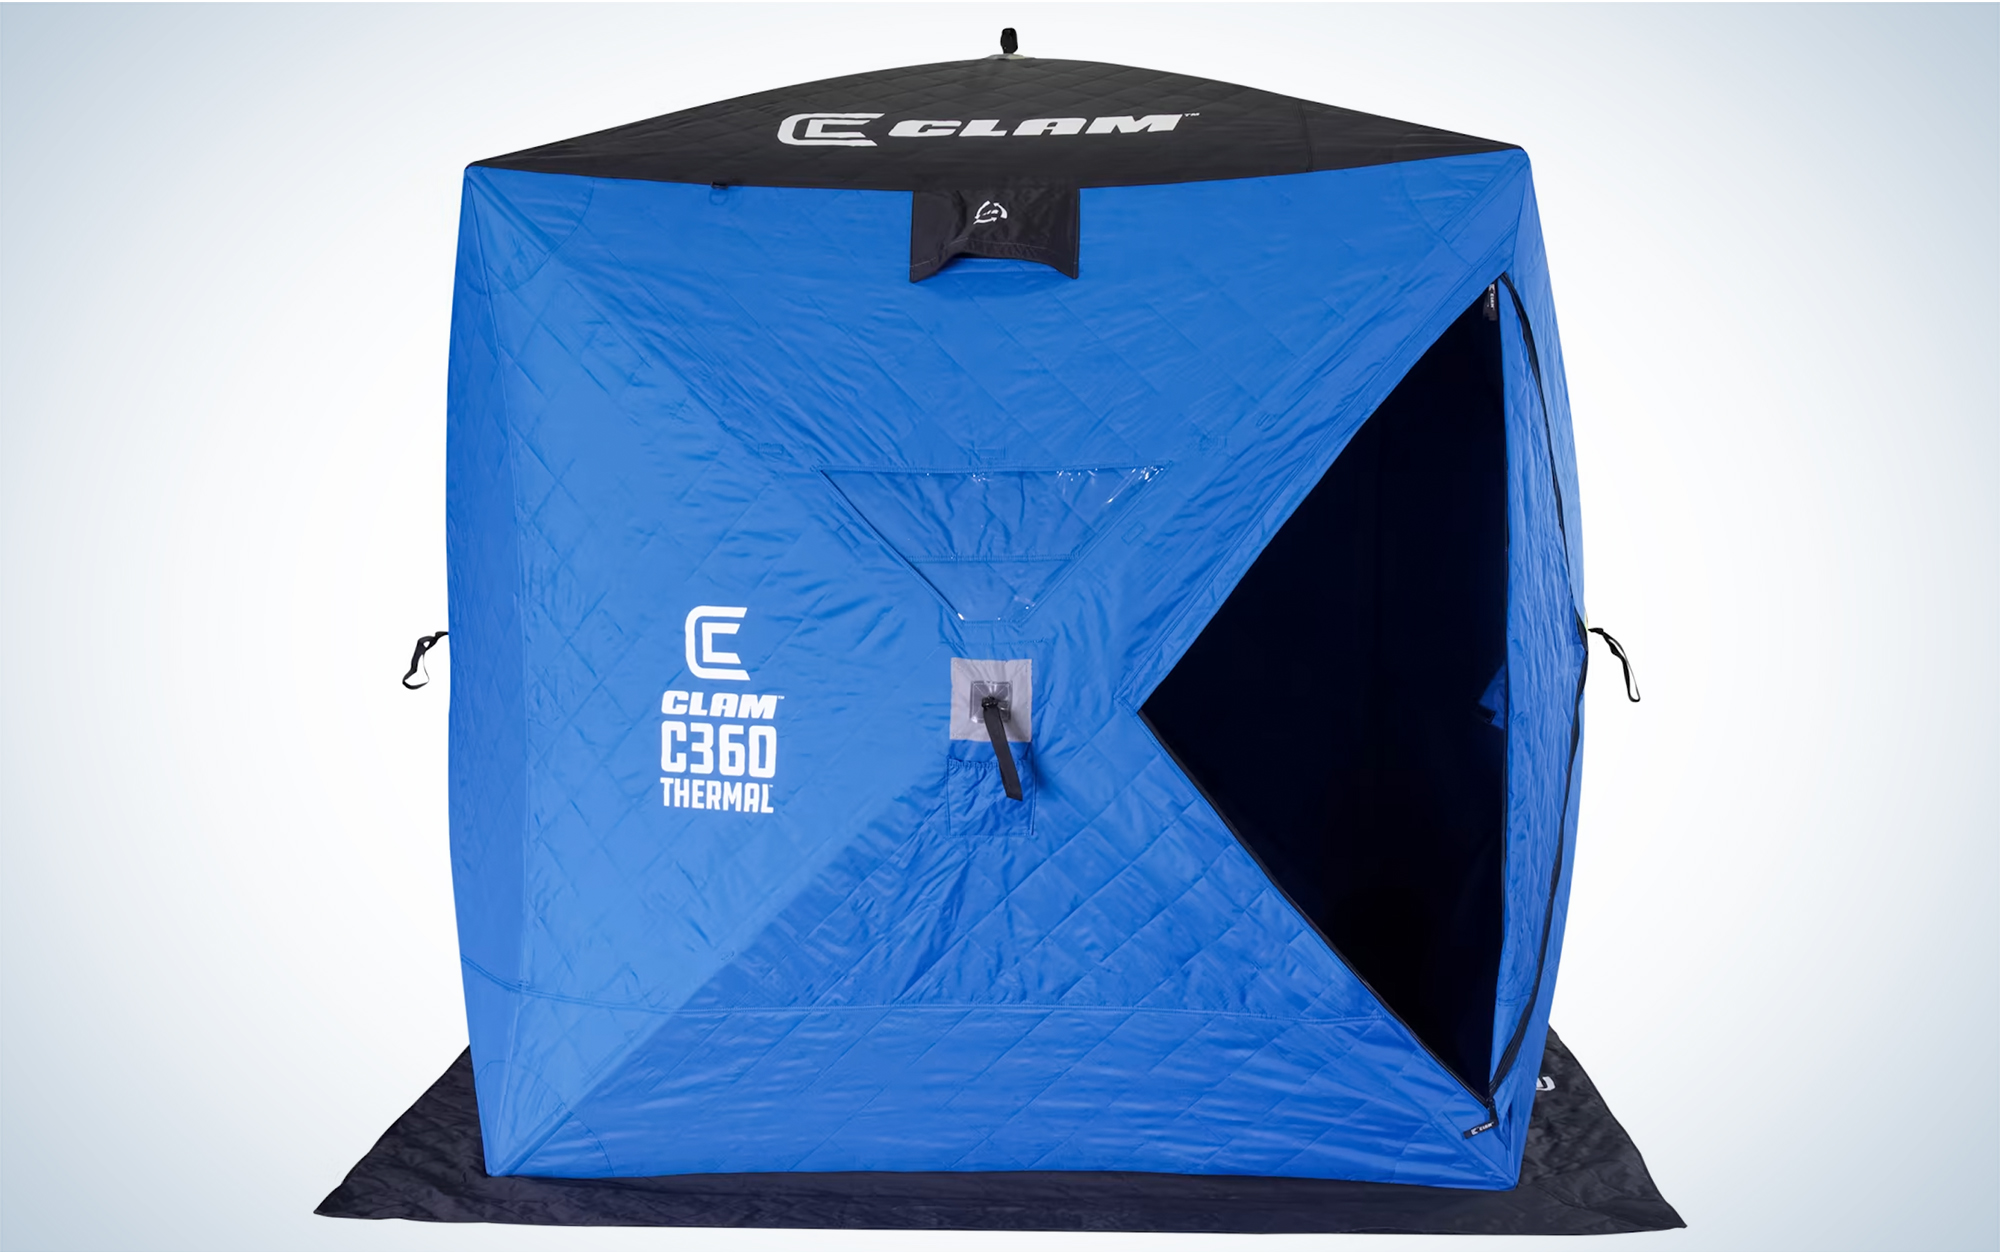 Deals on Ice Fishing Shelters and Fish Finders